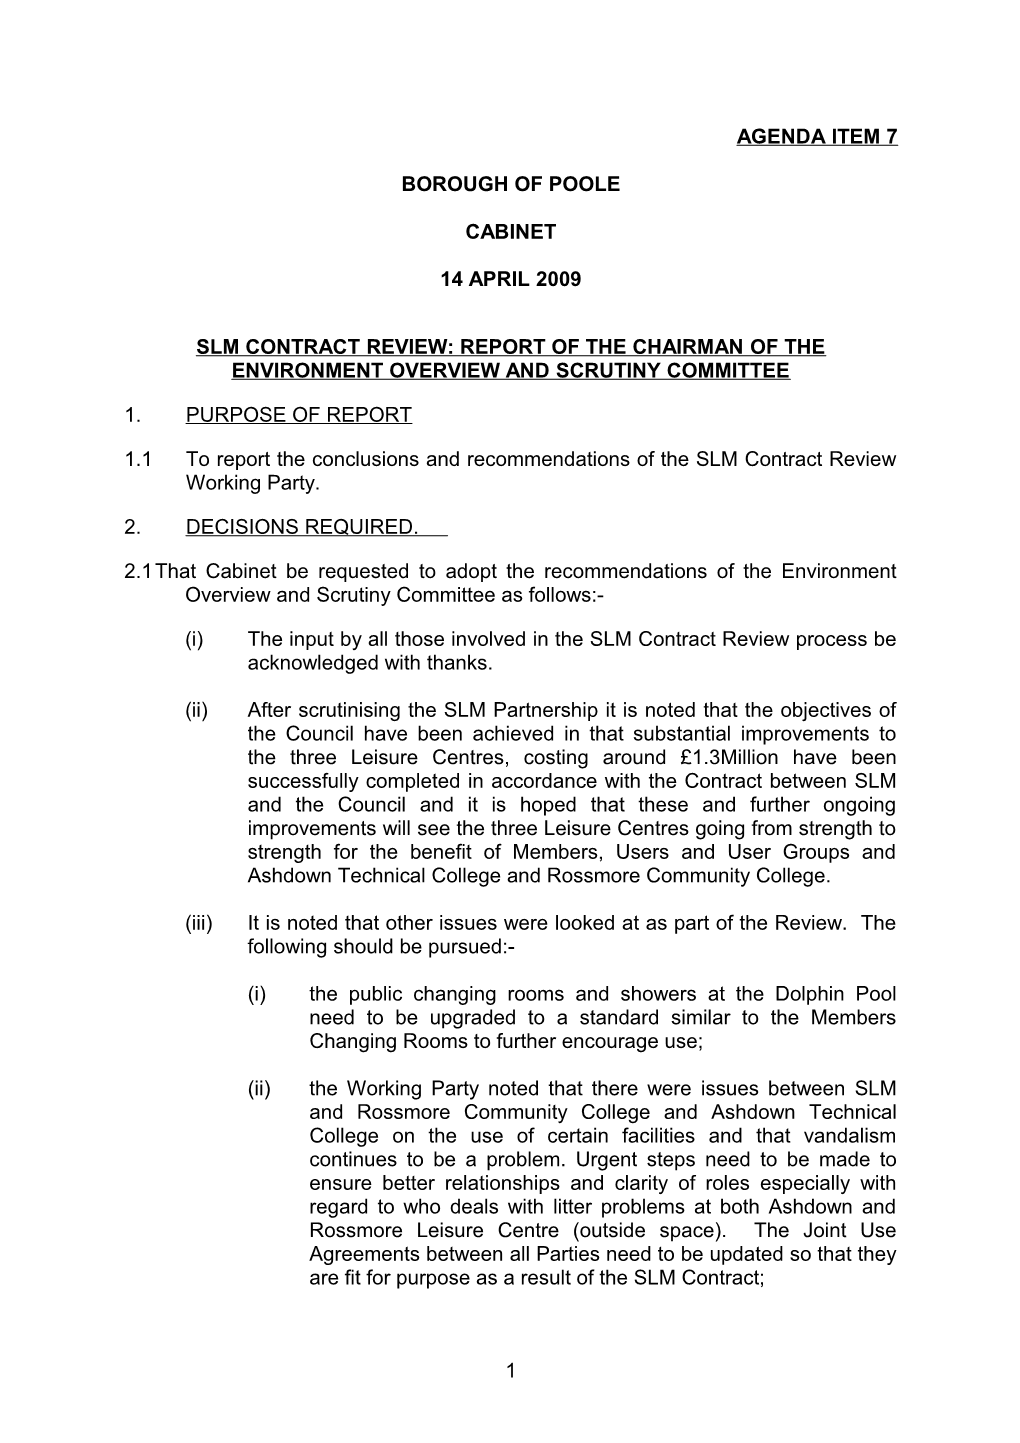 Slm Contract Review: Report of the Chairman of the Environment Overview and Scrutiny Committee